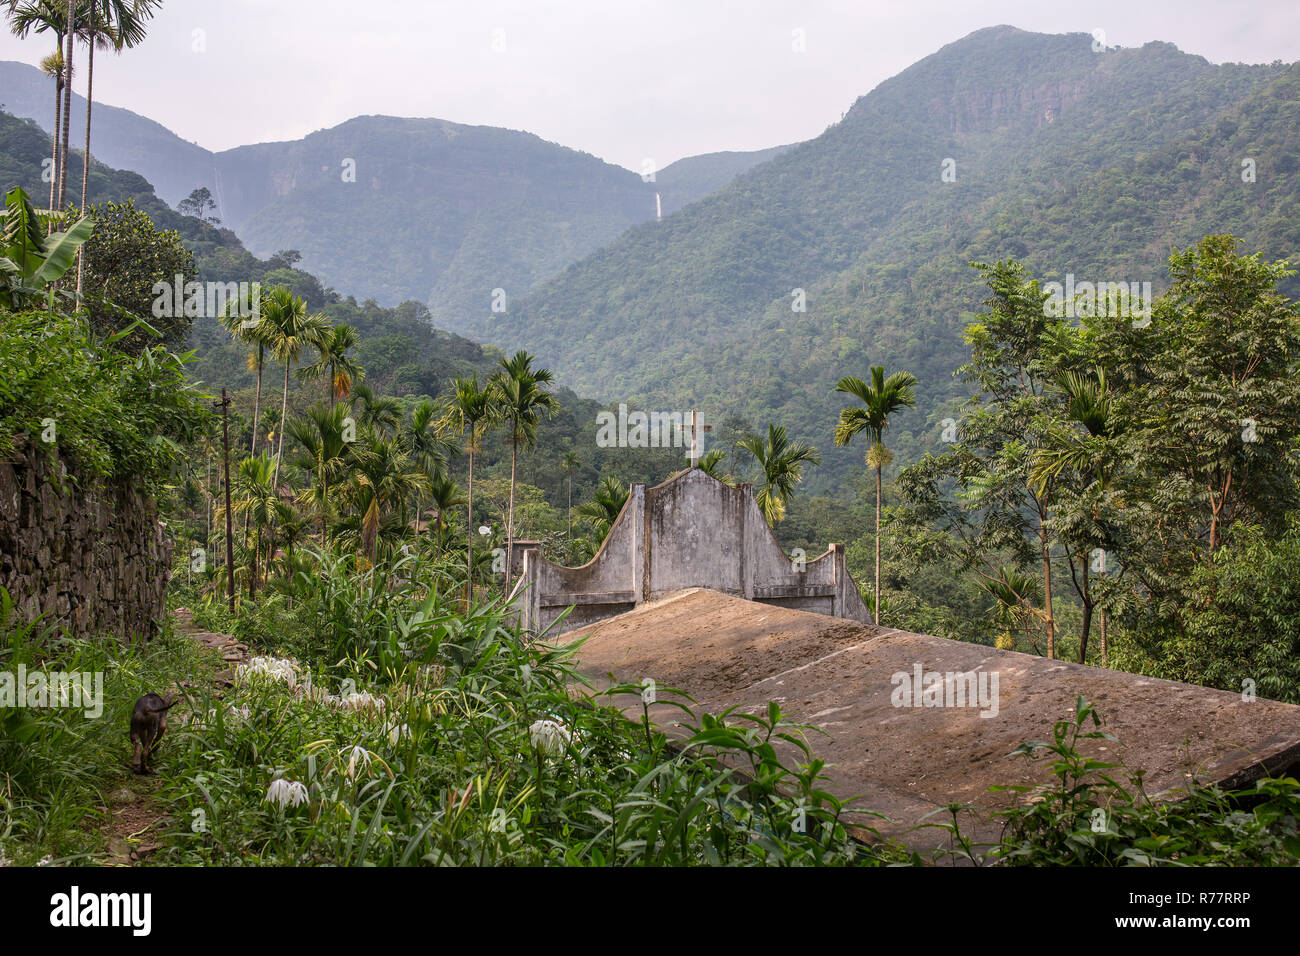 Tropical landscape with a church in Nongriat village in  state of Meghalaya, India Stock Photo